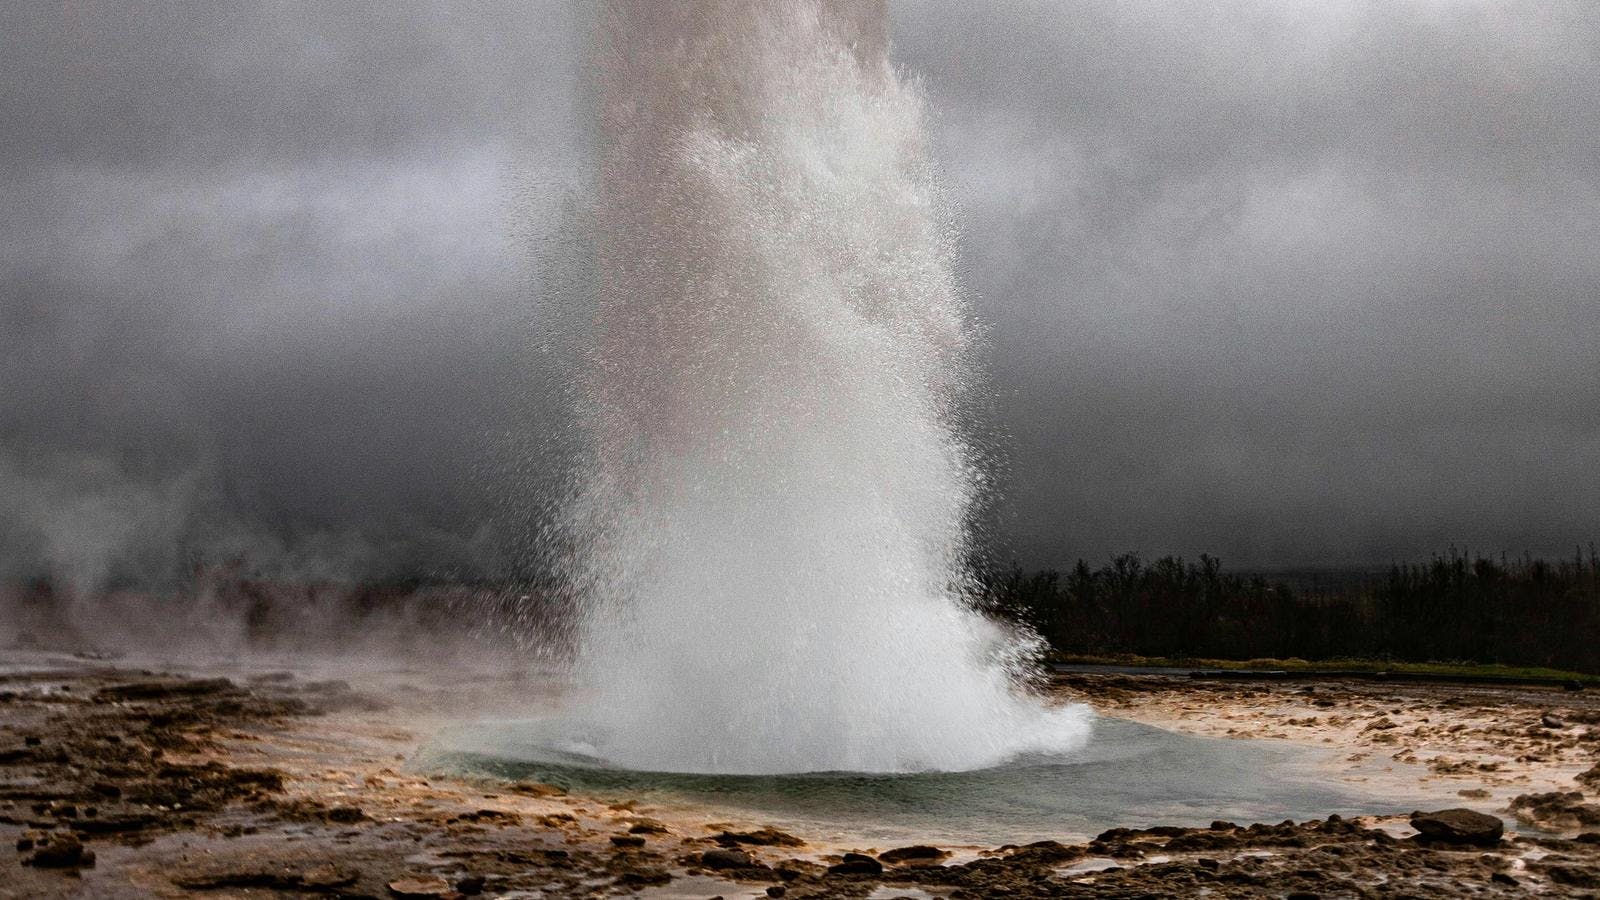 Strokkur erupting in the Geysir hot spring area on a cloudy summer day.